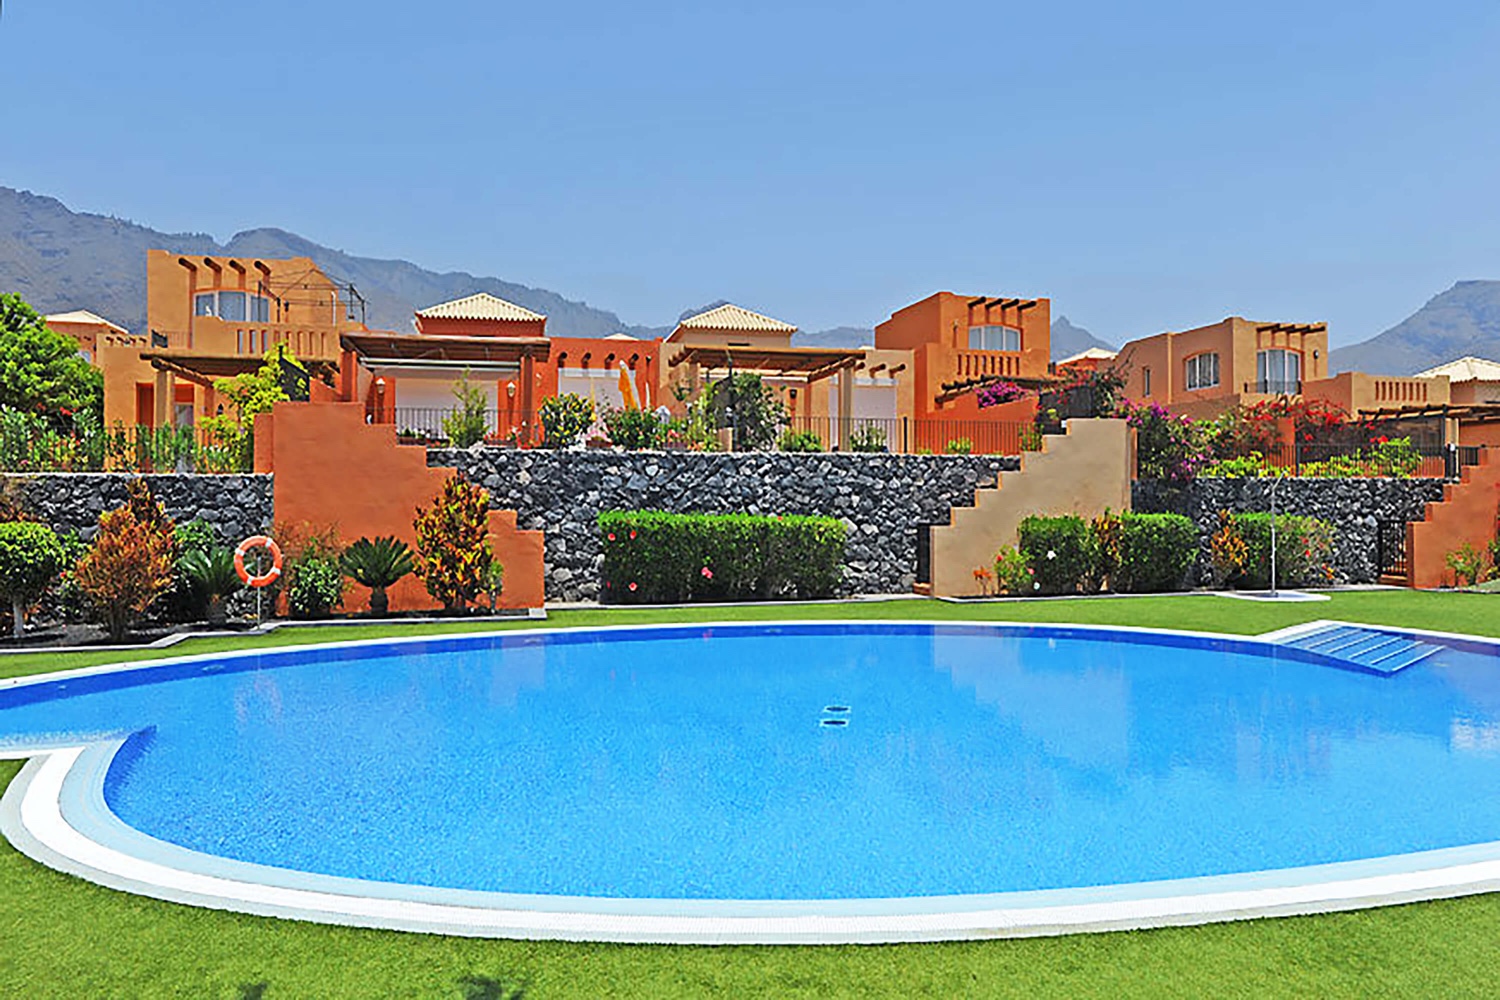 Modern and stylish two bedroom luxury villa with communal pool and located near the Costa Adeje golf course